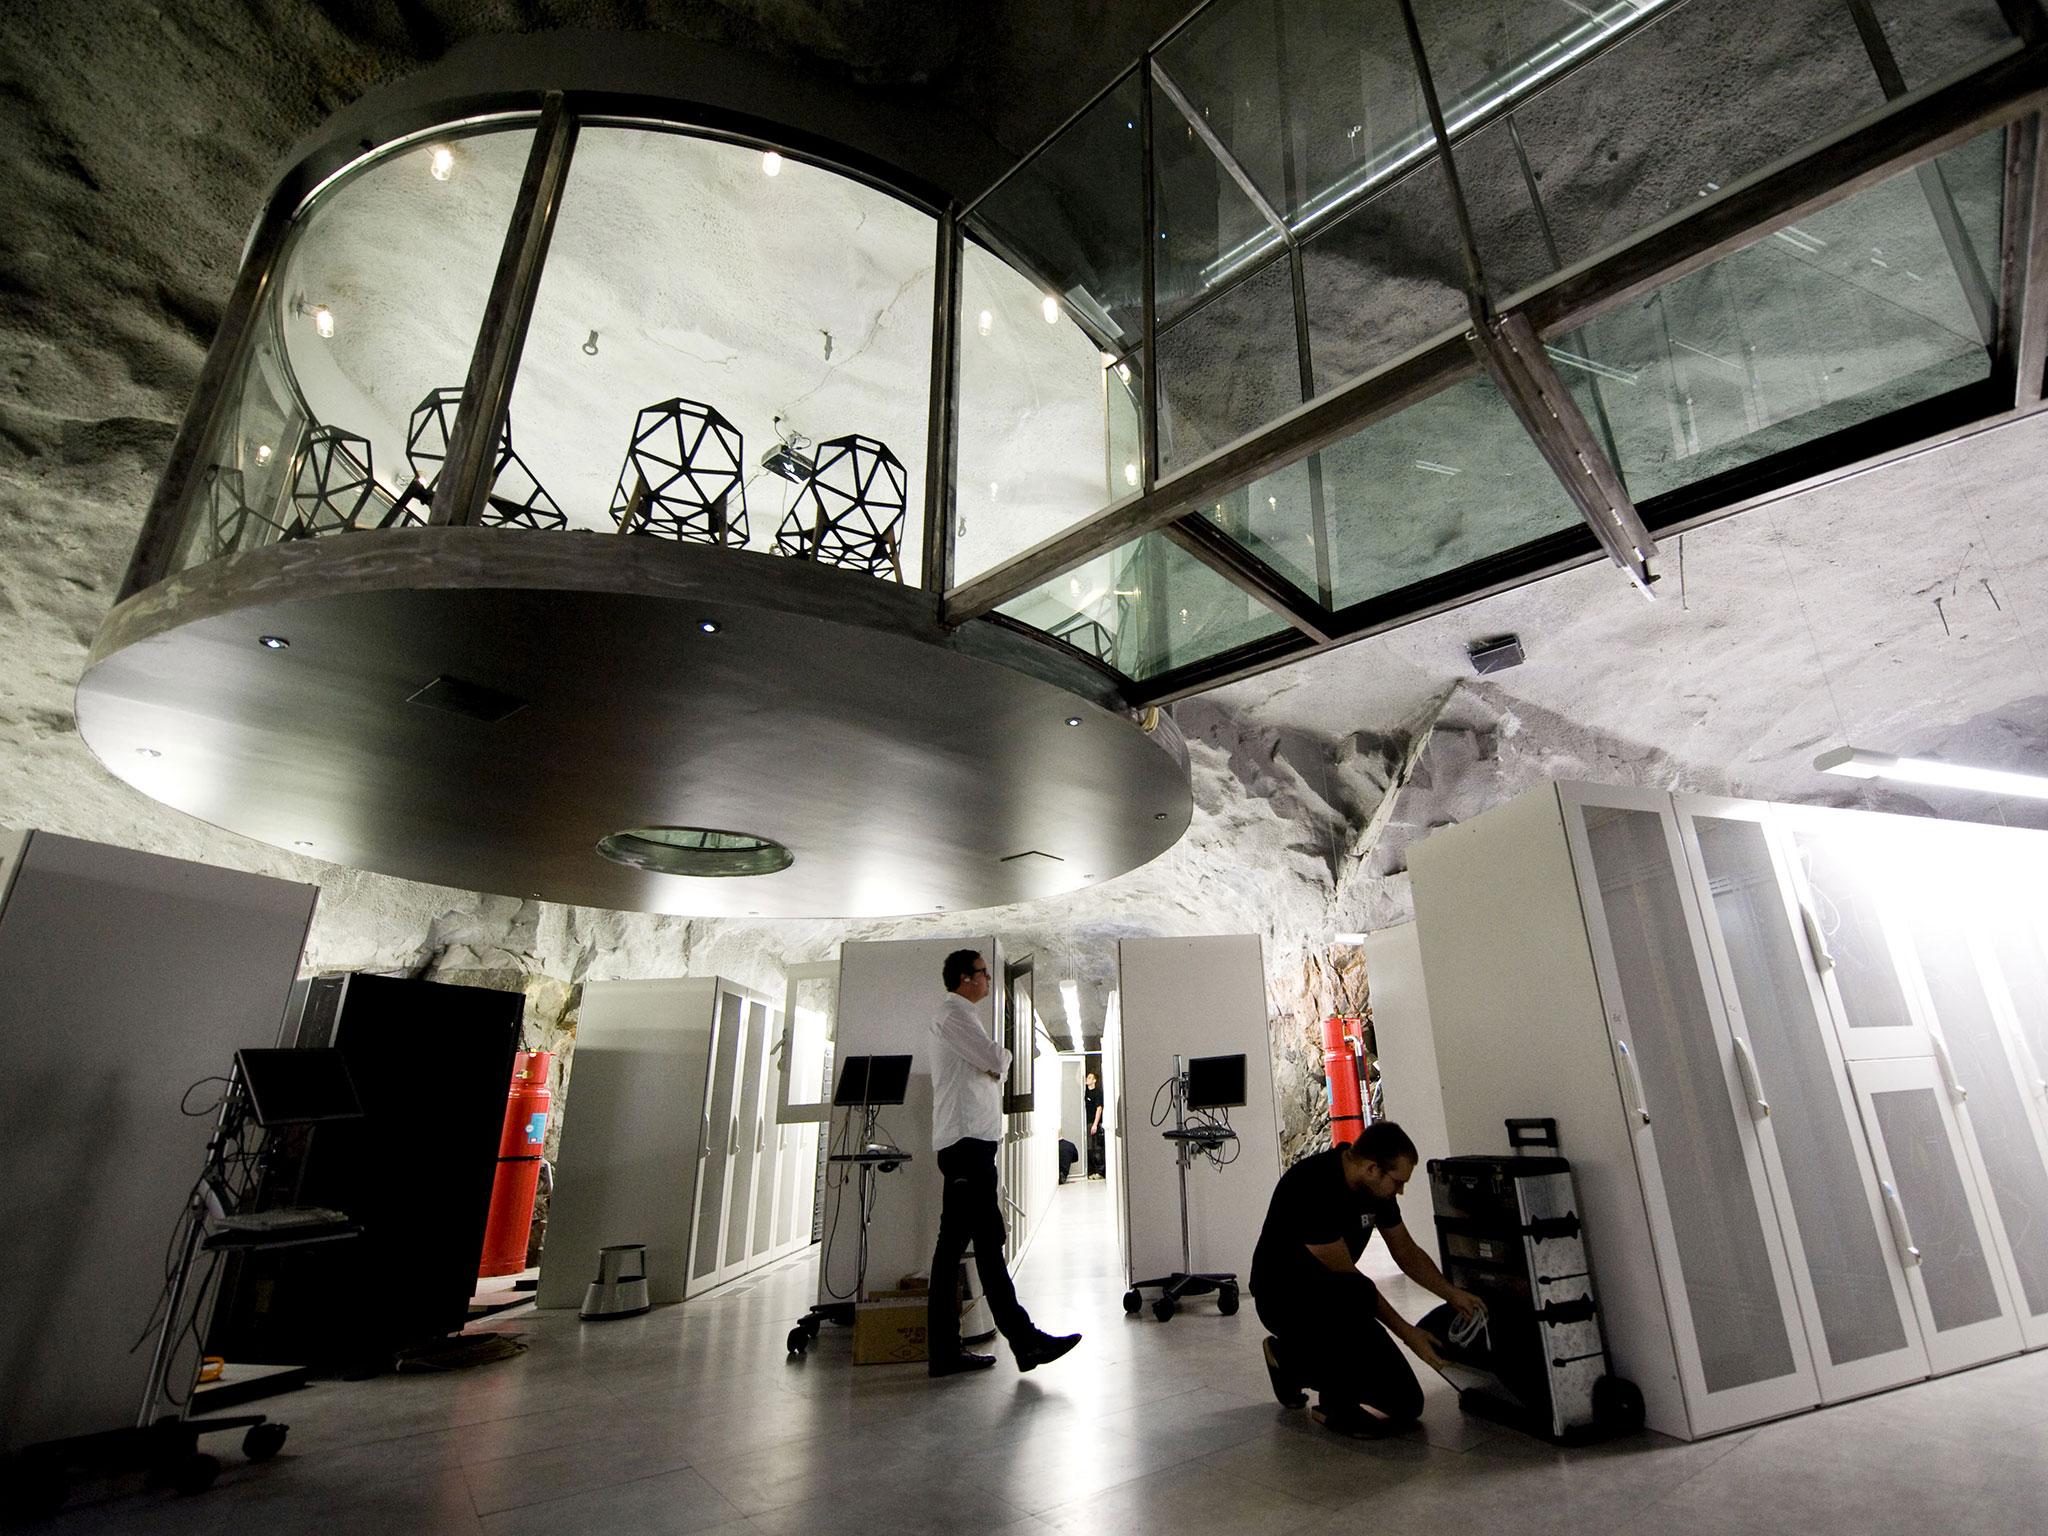 Once a Cold-War era bunker and nuclear shelter, the Pionen White Mountain has been converted into a data centre and hosts some of WikiLeaks' servers